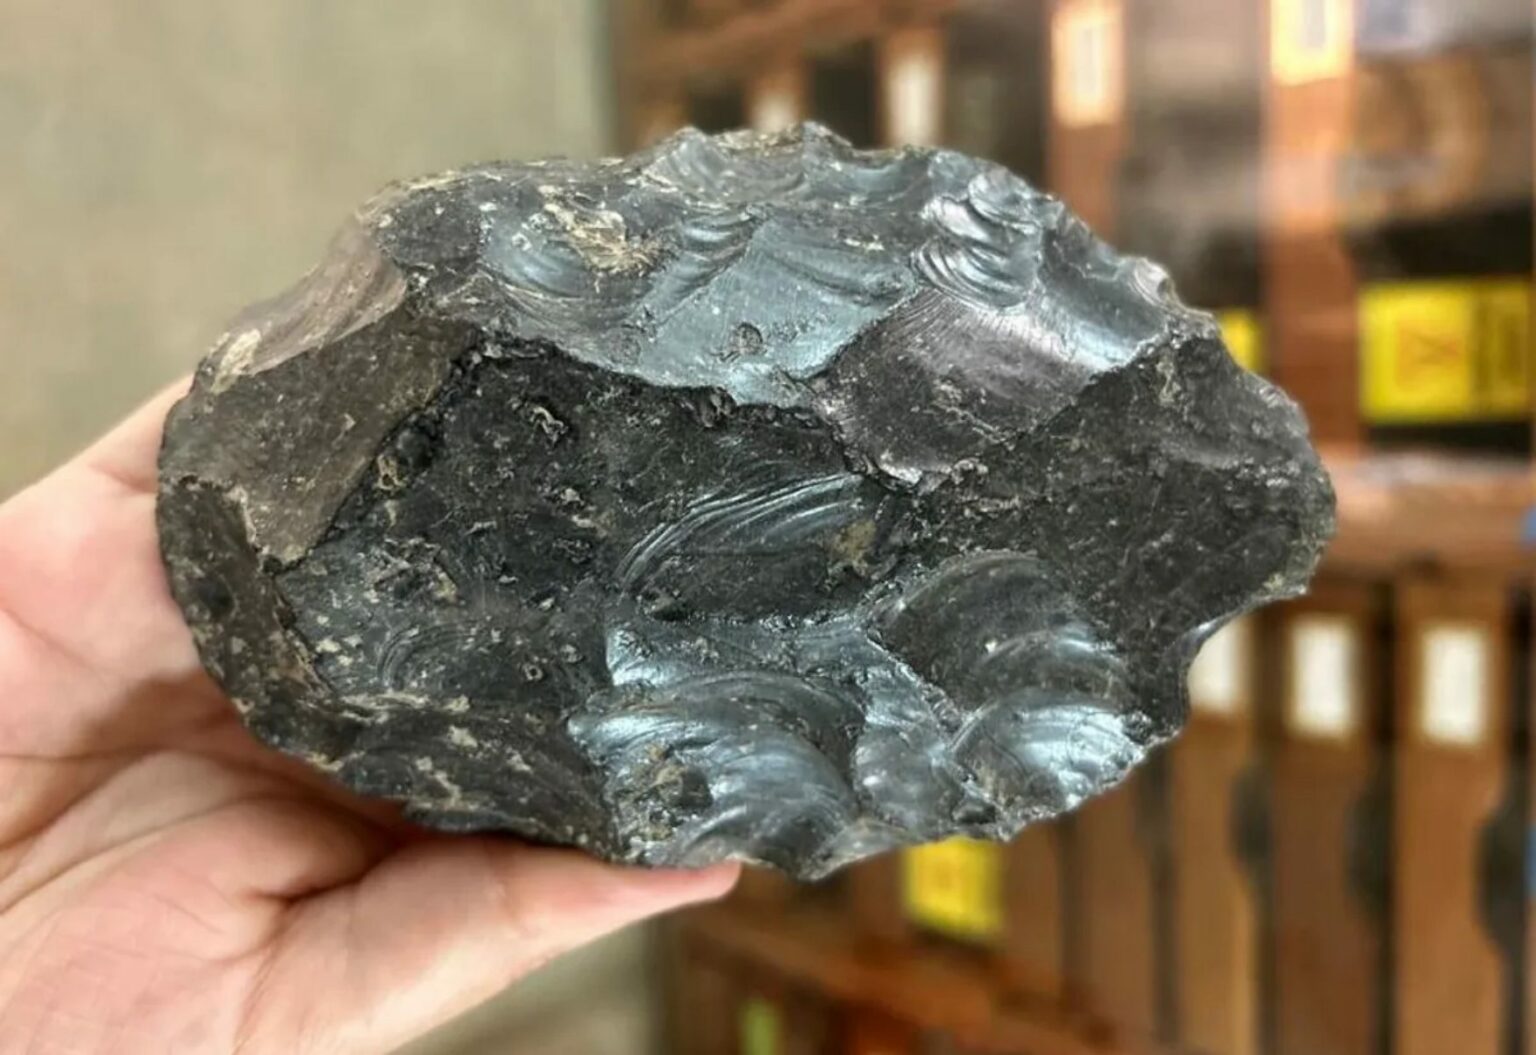 1.2-million-year-old obsidian axe factory found in ethiopia